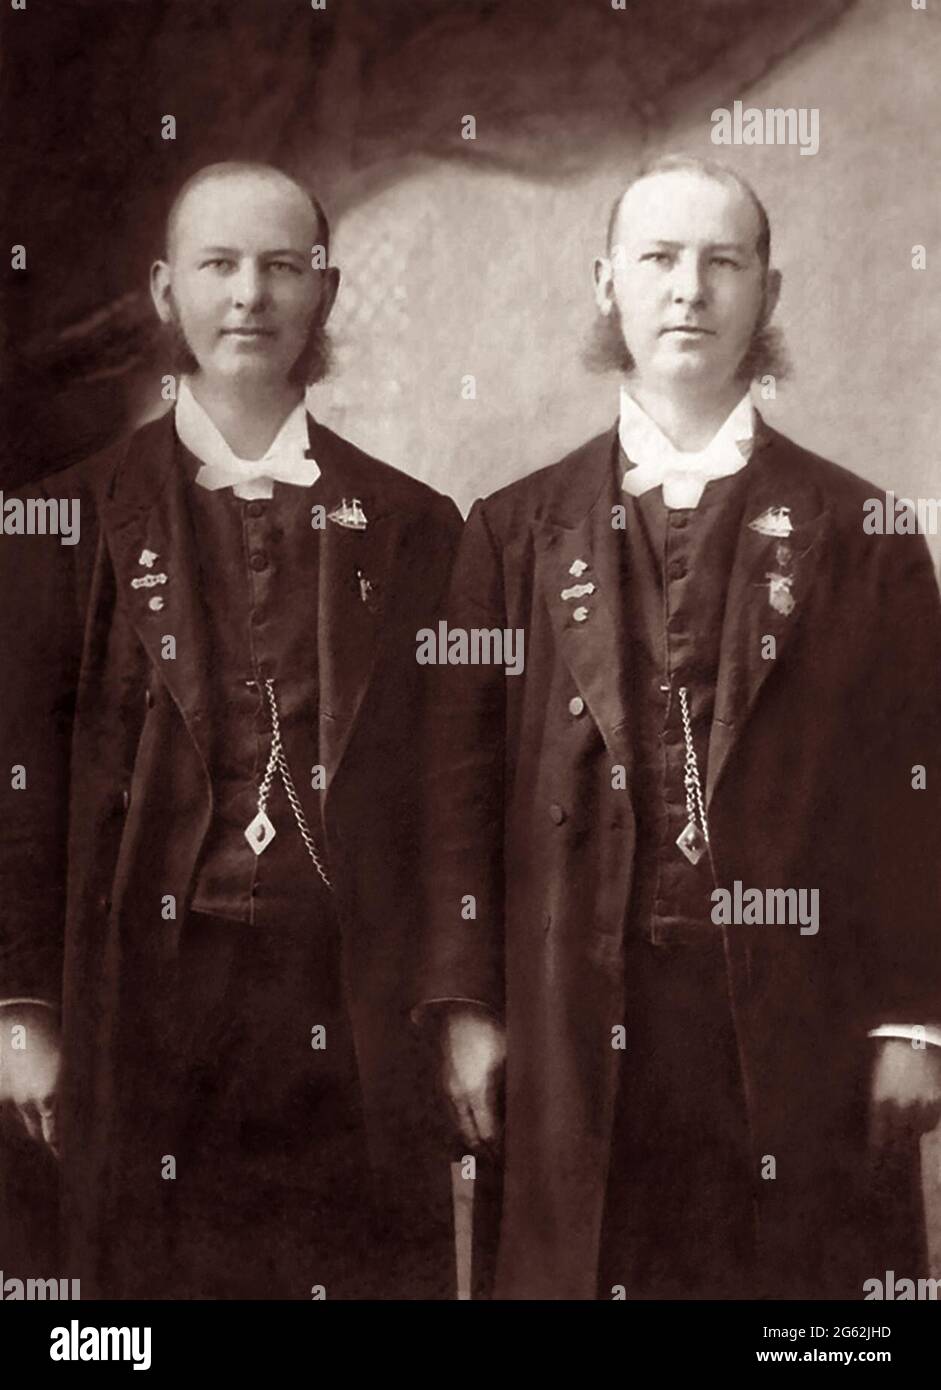 The Rev. Morrill Twins, ordained evangelists and pastors of the Gospel Ship Union Church in Chicago, Illinois. Photo by Wendt, Boonton, NJ, c1890s. Stock Photo